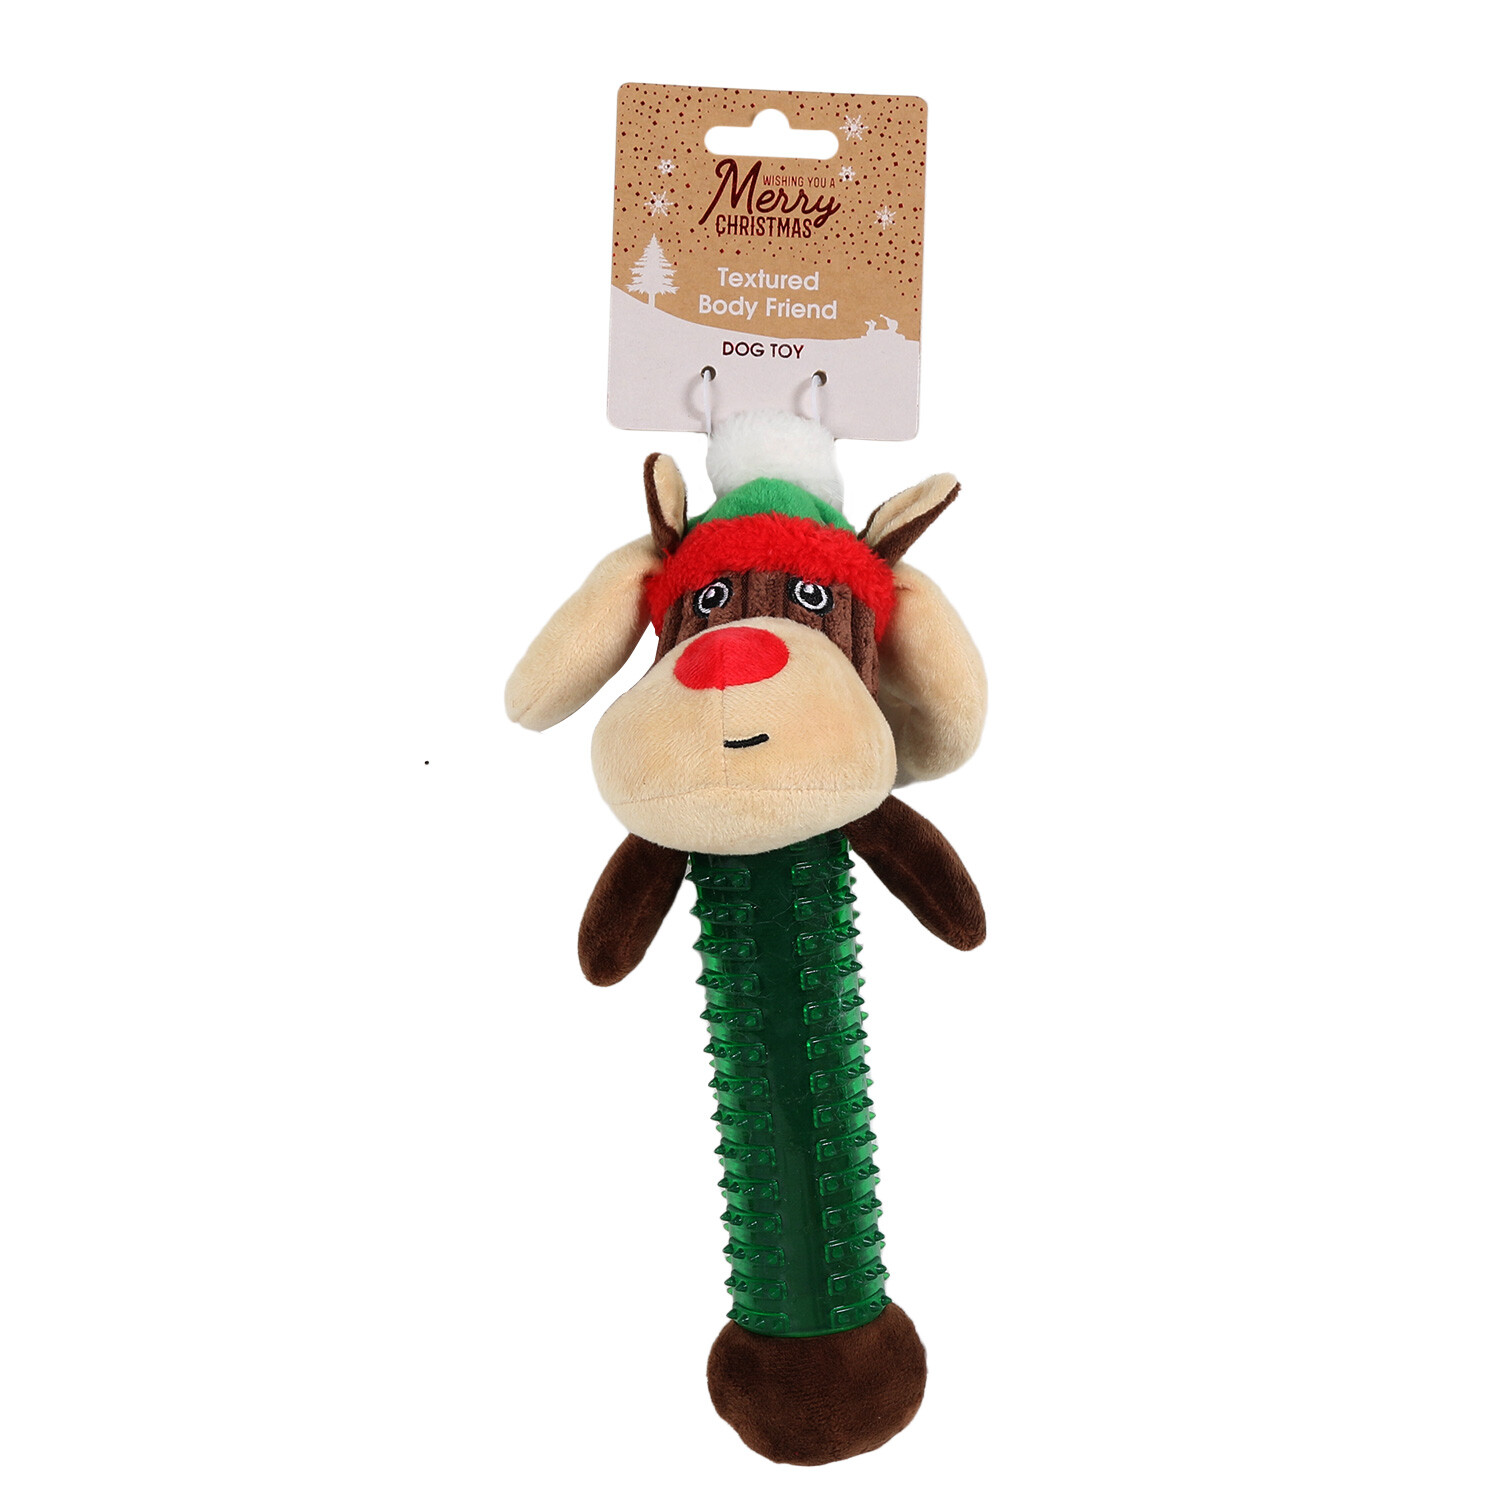 Textured Body Friend Dog Toy - Green Image 4